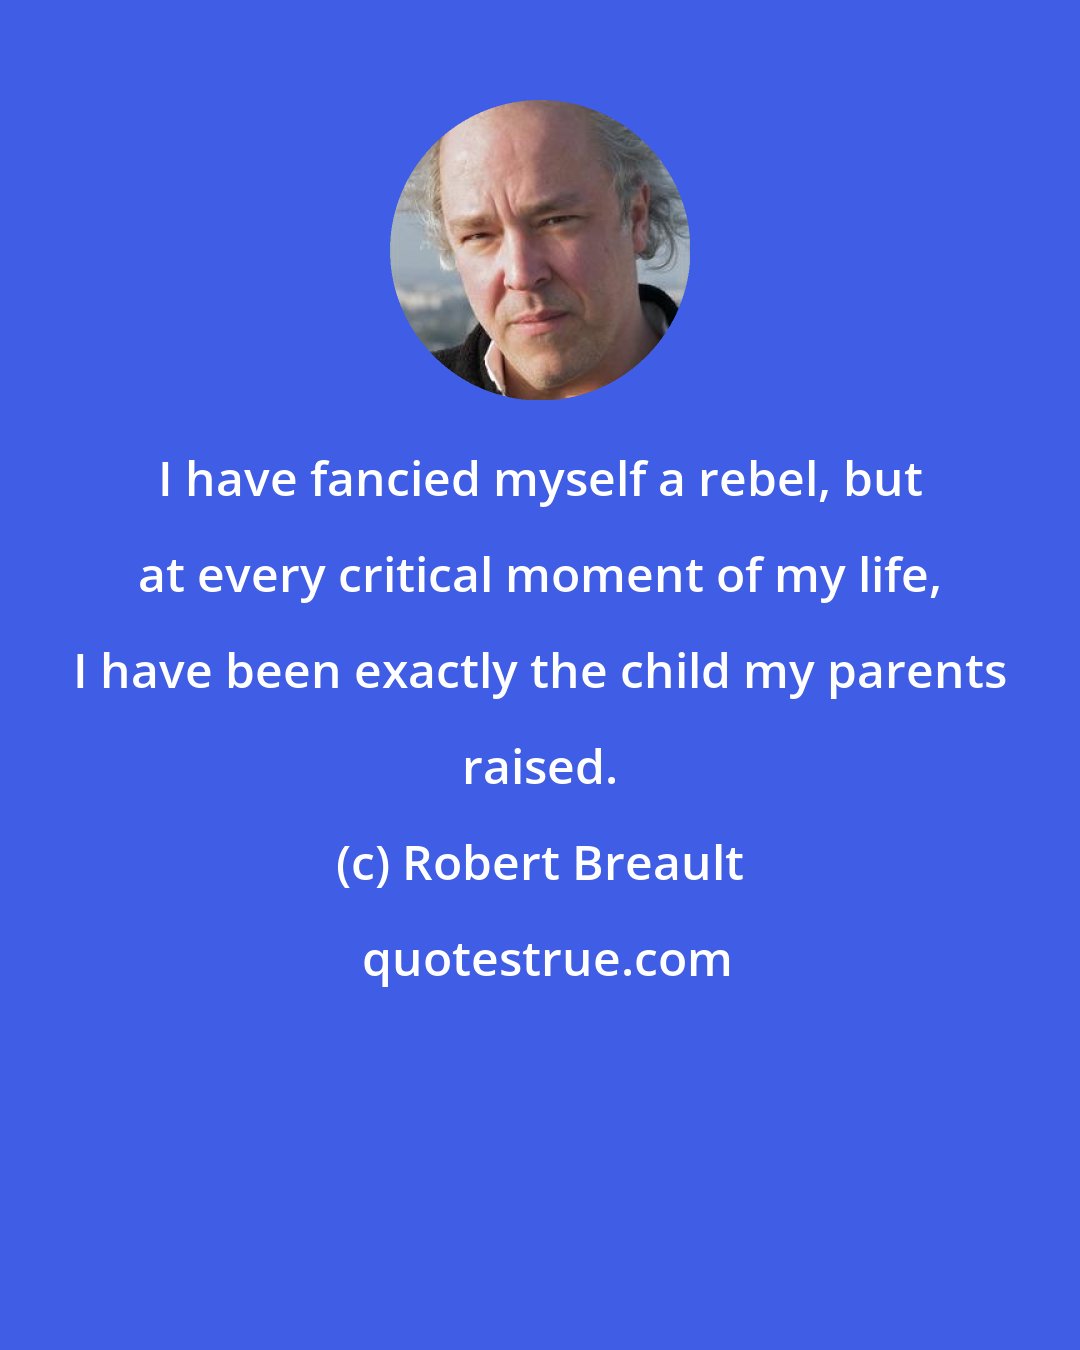 Robert Breault: I have fancied myself a rebel, but at every critical moment of my life, I have been exactly the child my parents raised.